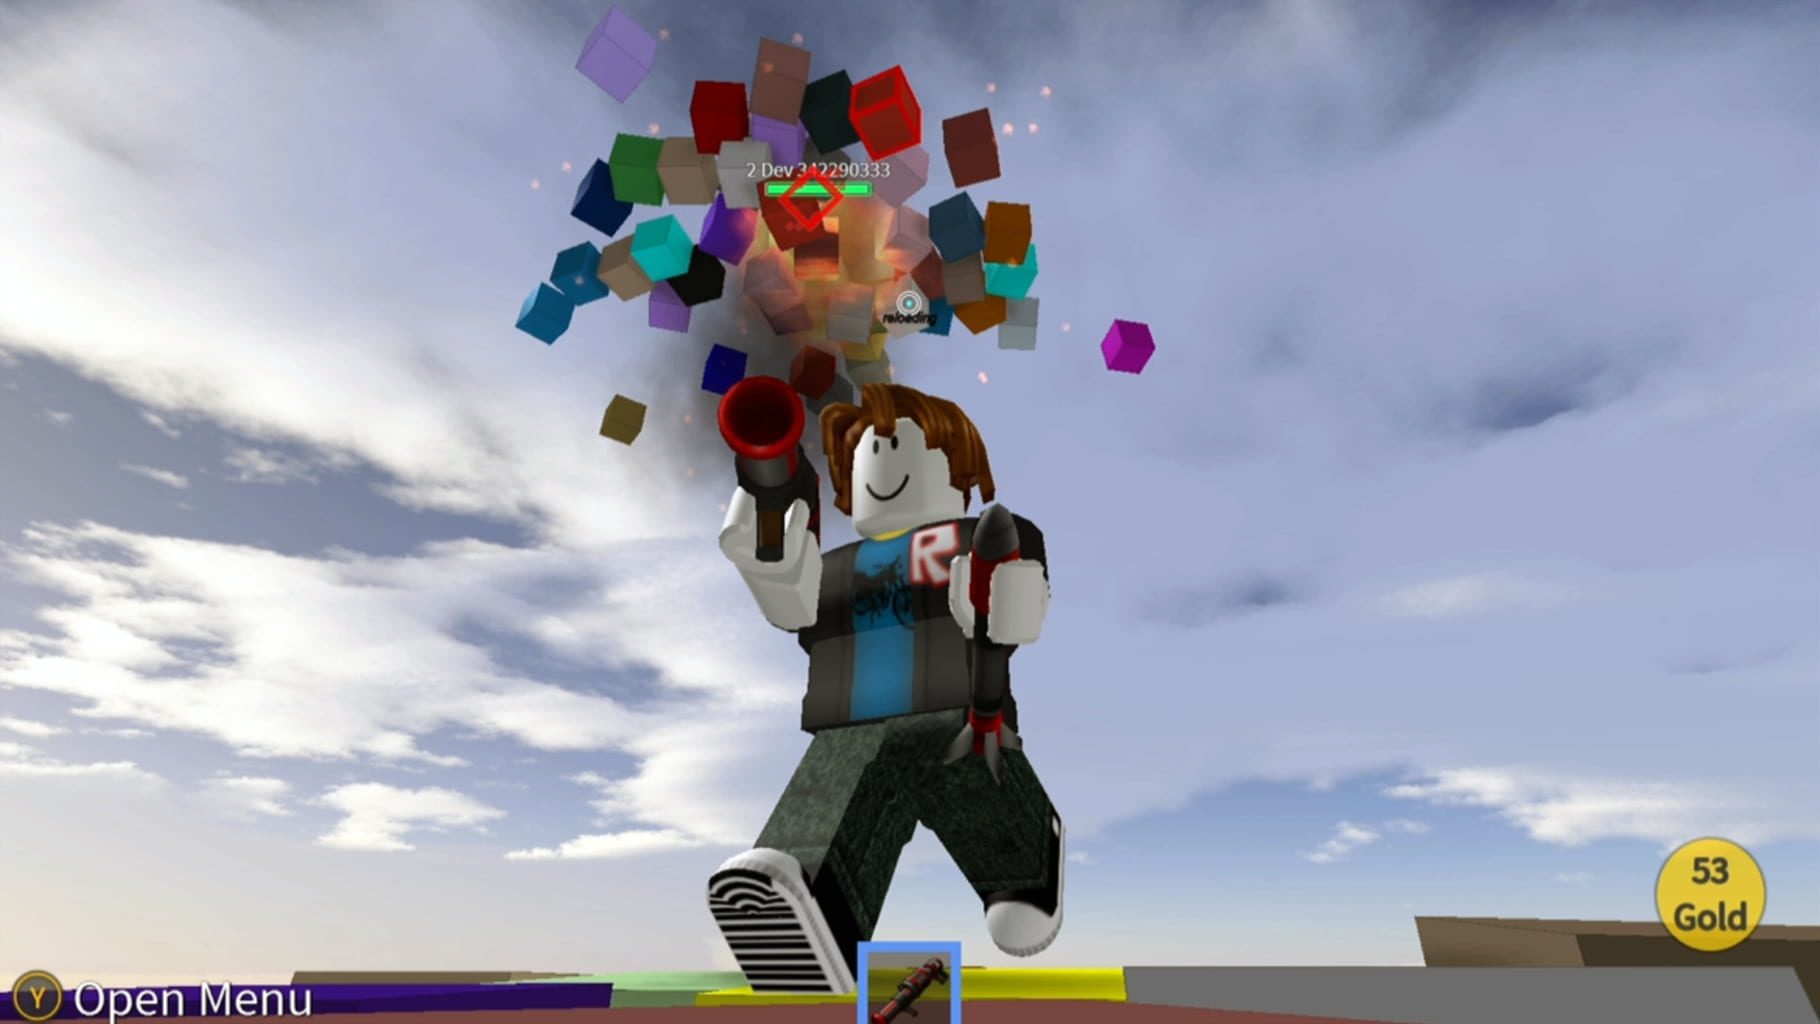 How To Reduce Roblox Lag 2020